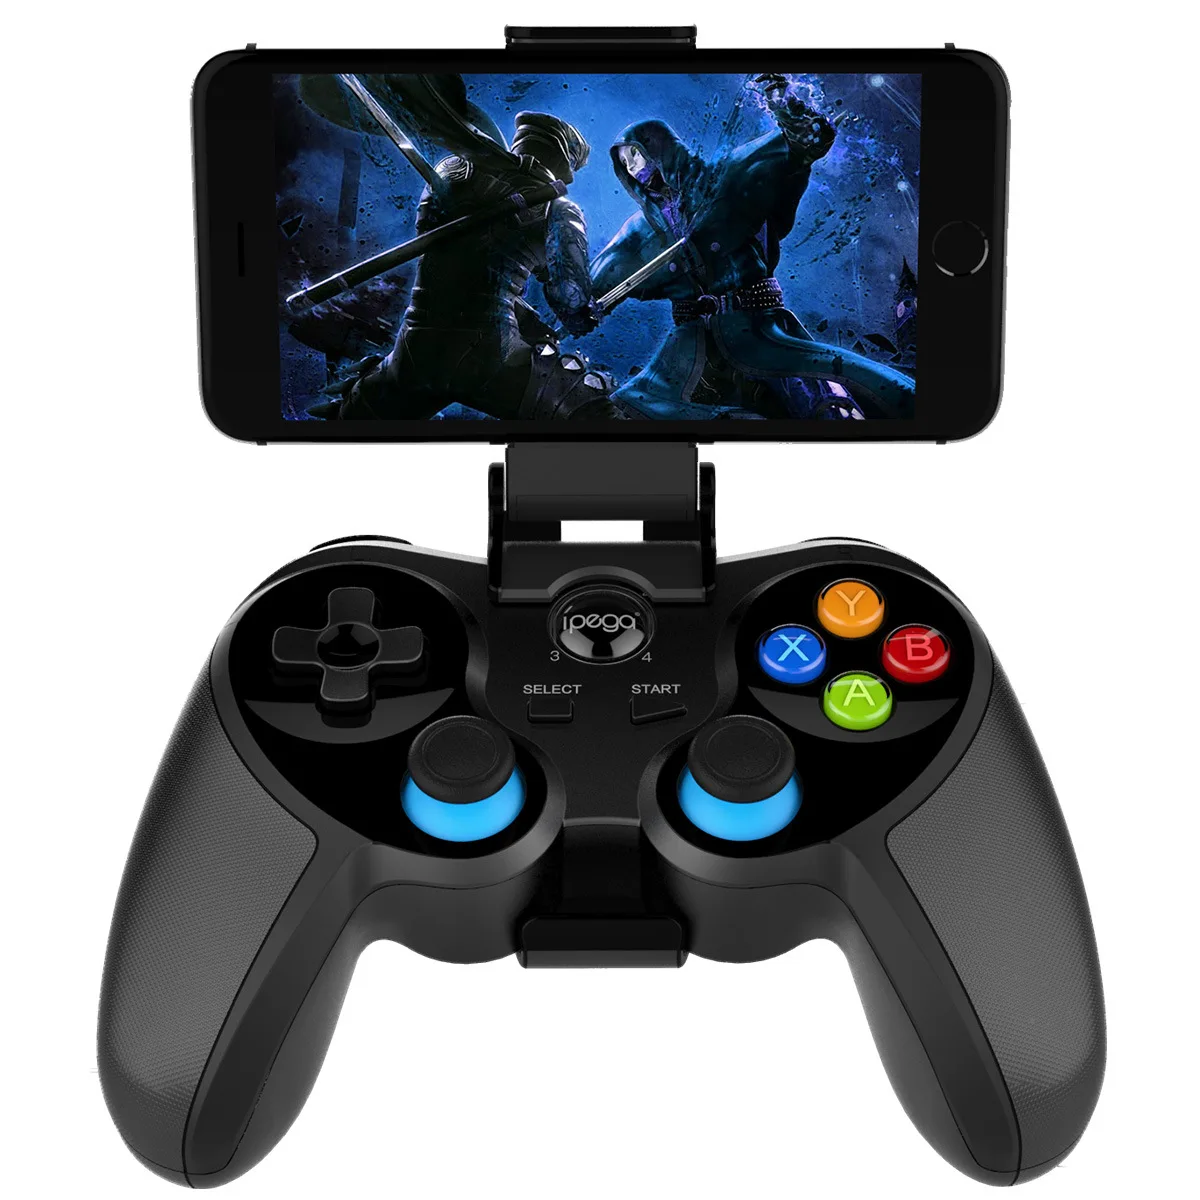 

PG-9157 Wireless BT Gamepad Gaming Controller Joystick For Android iOS Mobile Phone Tablet Joypad, Black